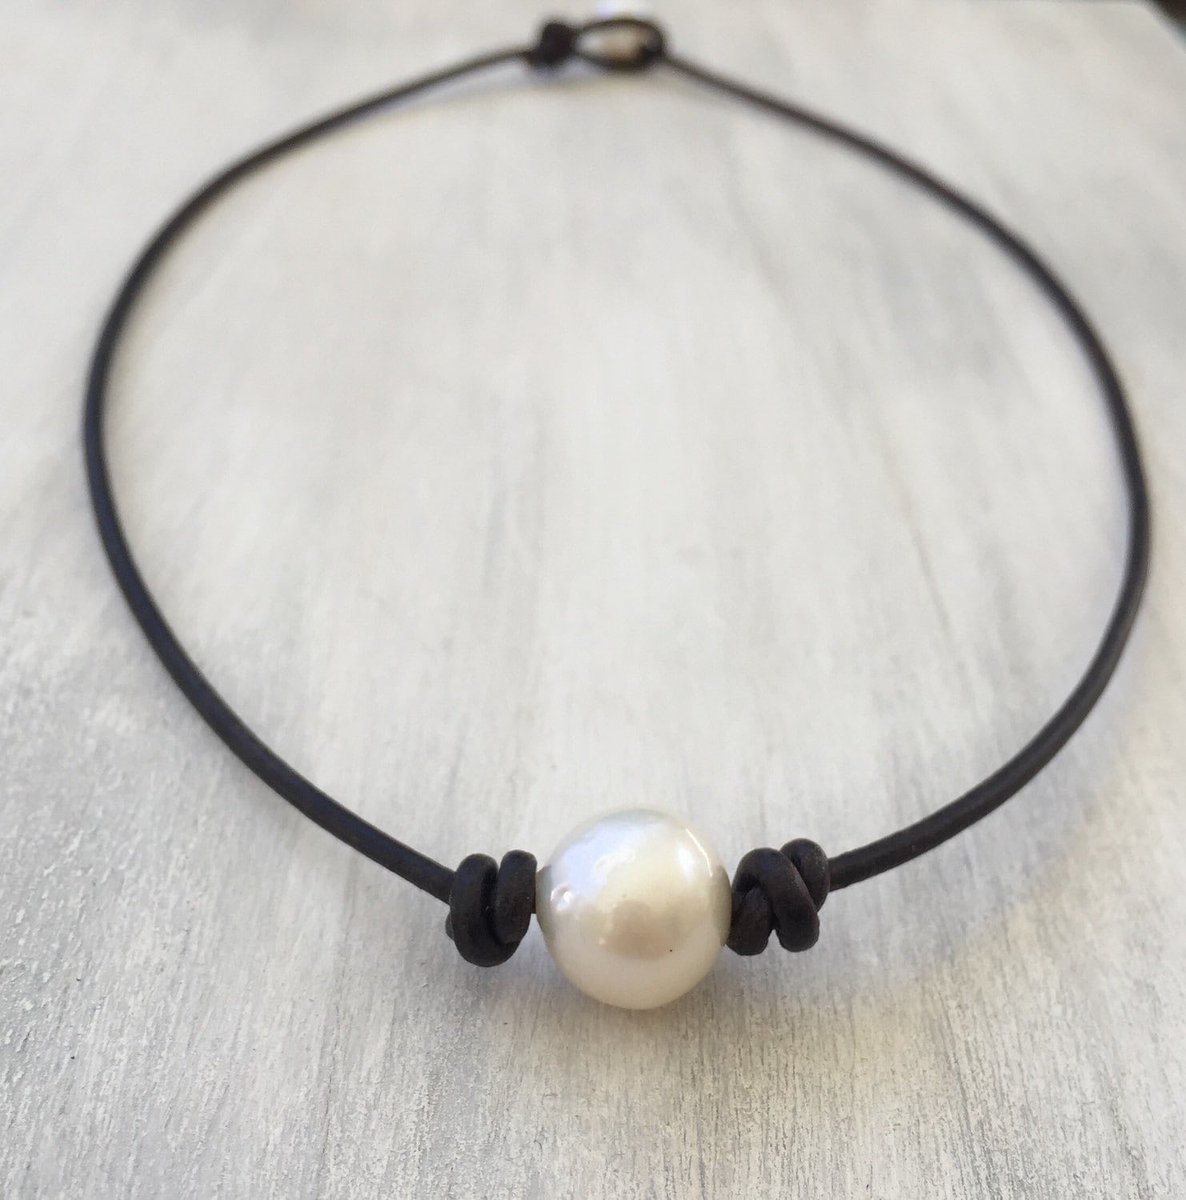 Leather and pearl necklace #leatherandpearl #jewelry #pearljewelry #necklace #etsy #etsyshop #pearlnecklace #leatherjewelry#